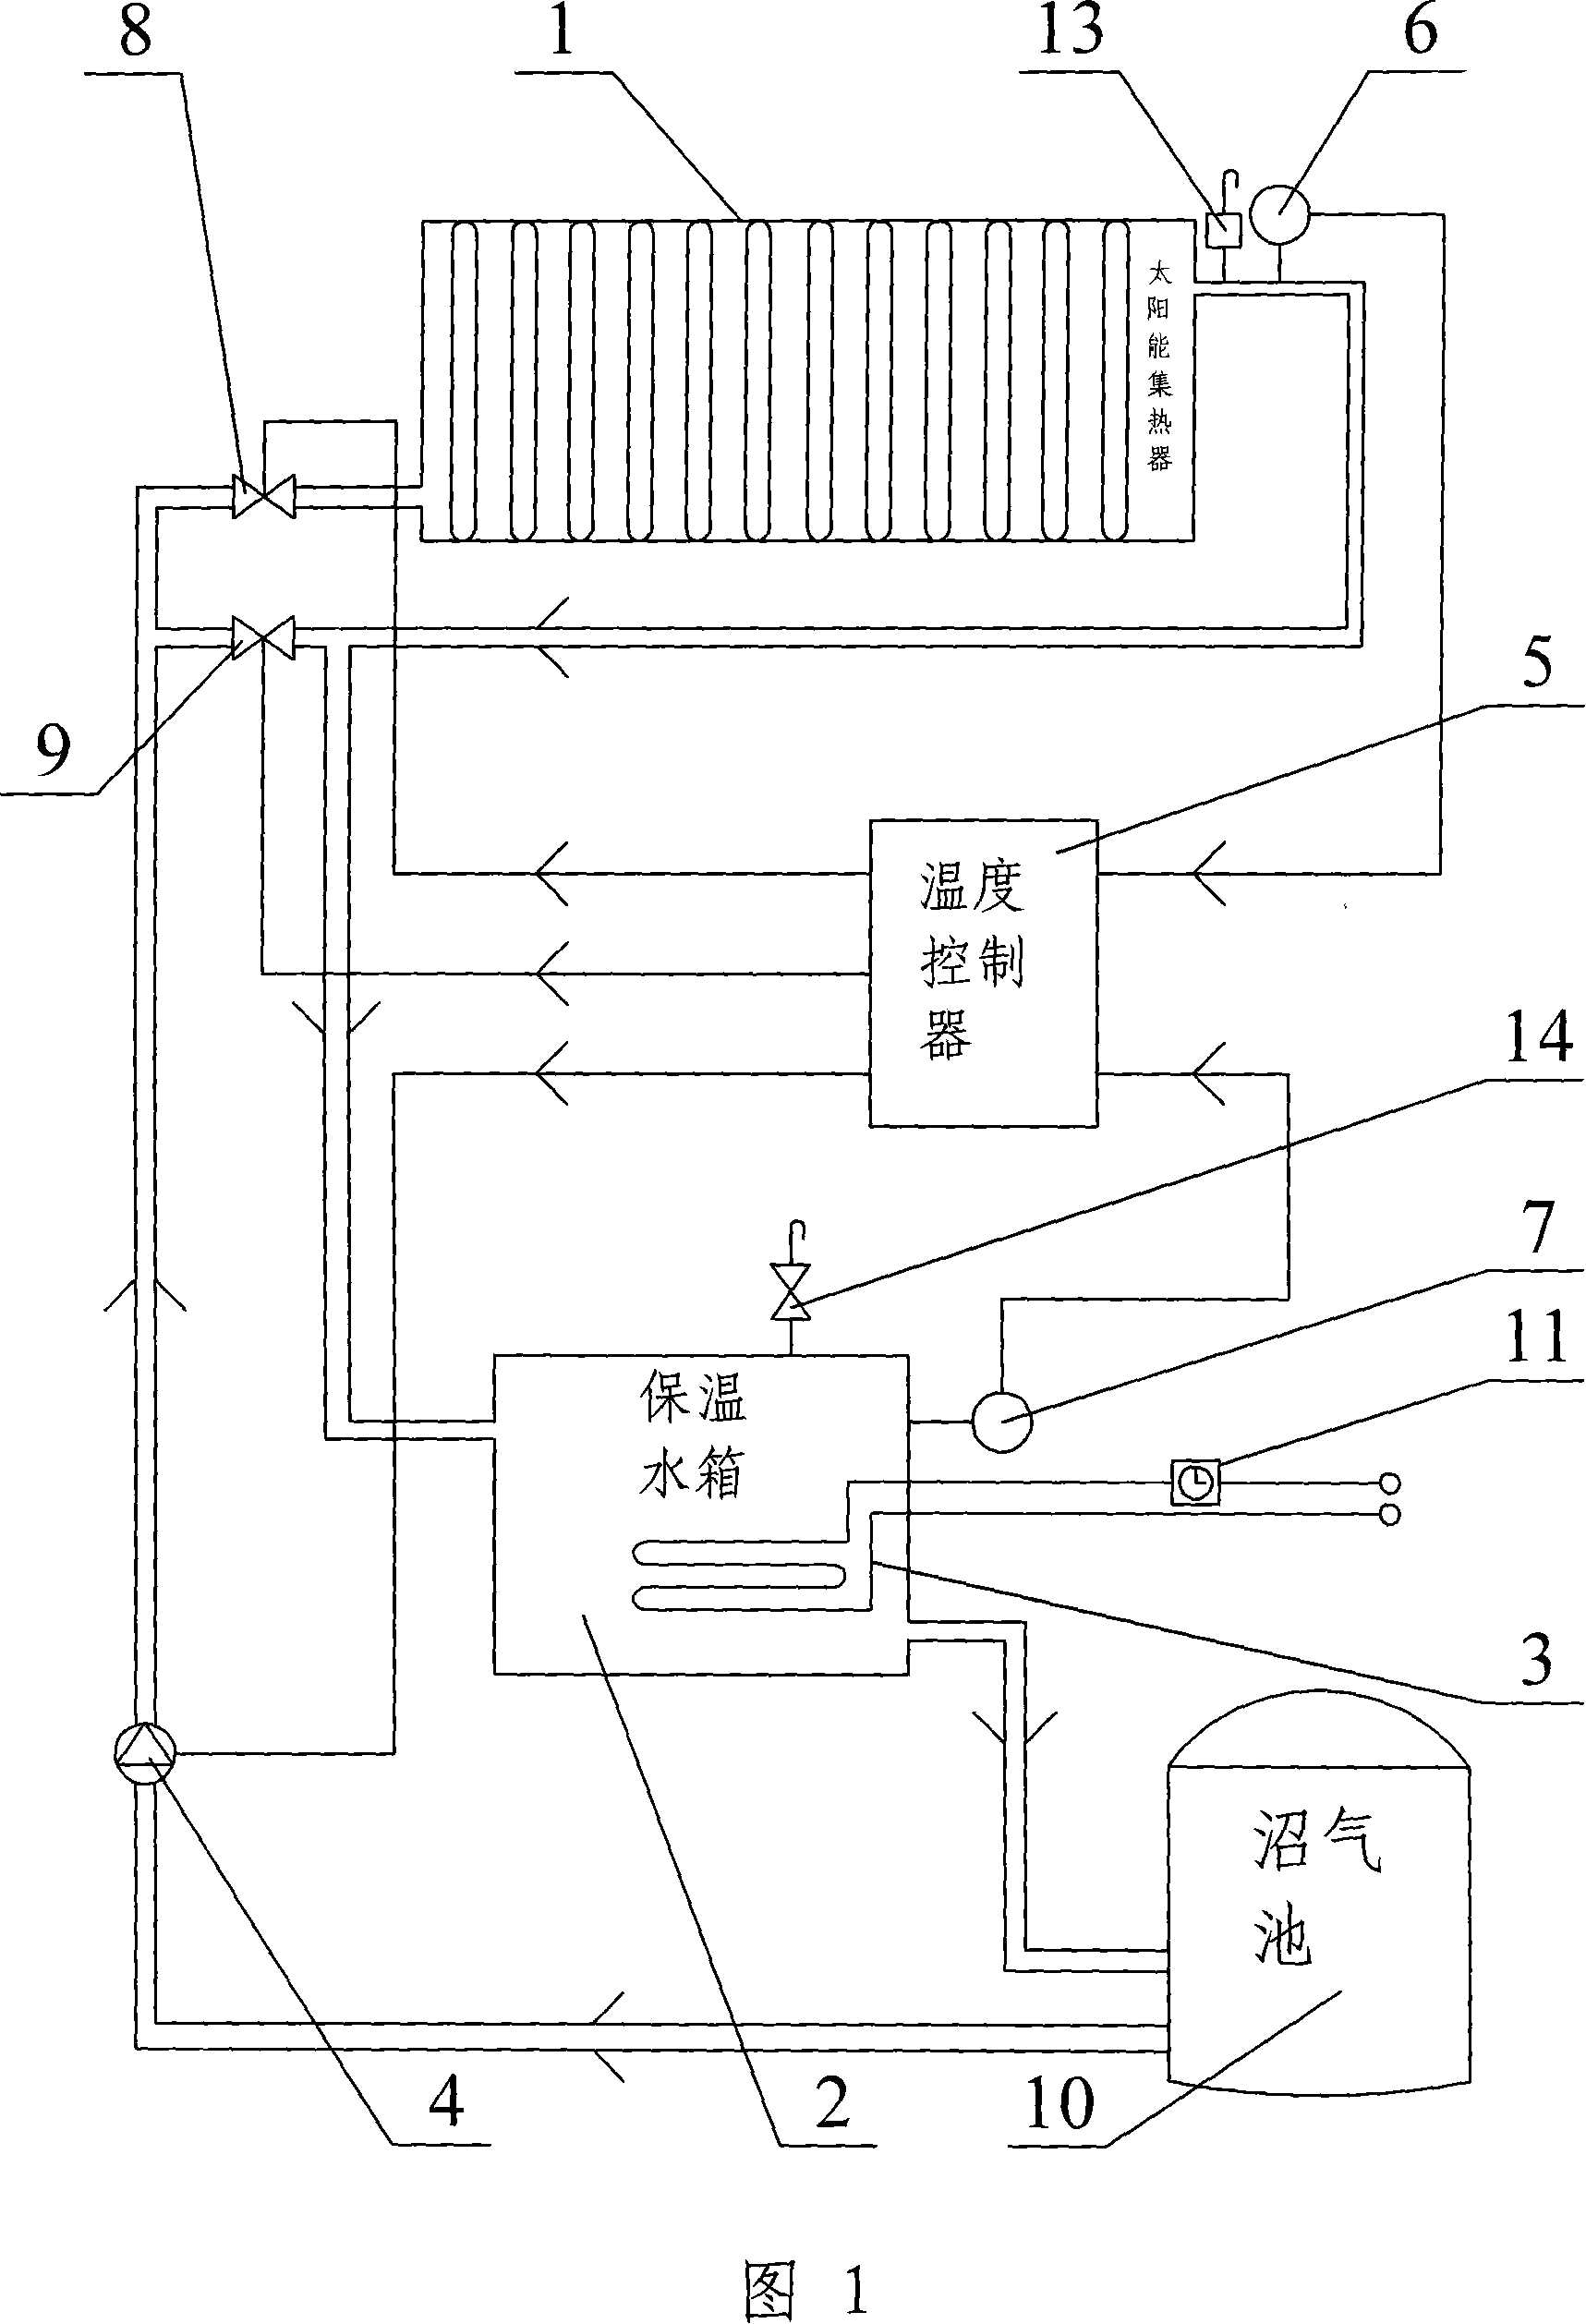 System for heat-producing sludge gas by combination of solar and electric heating tubes